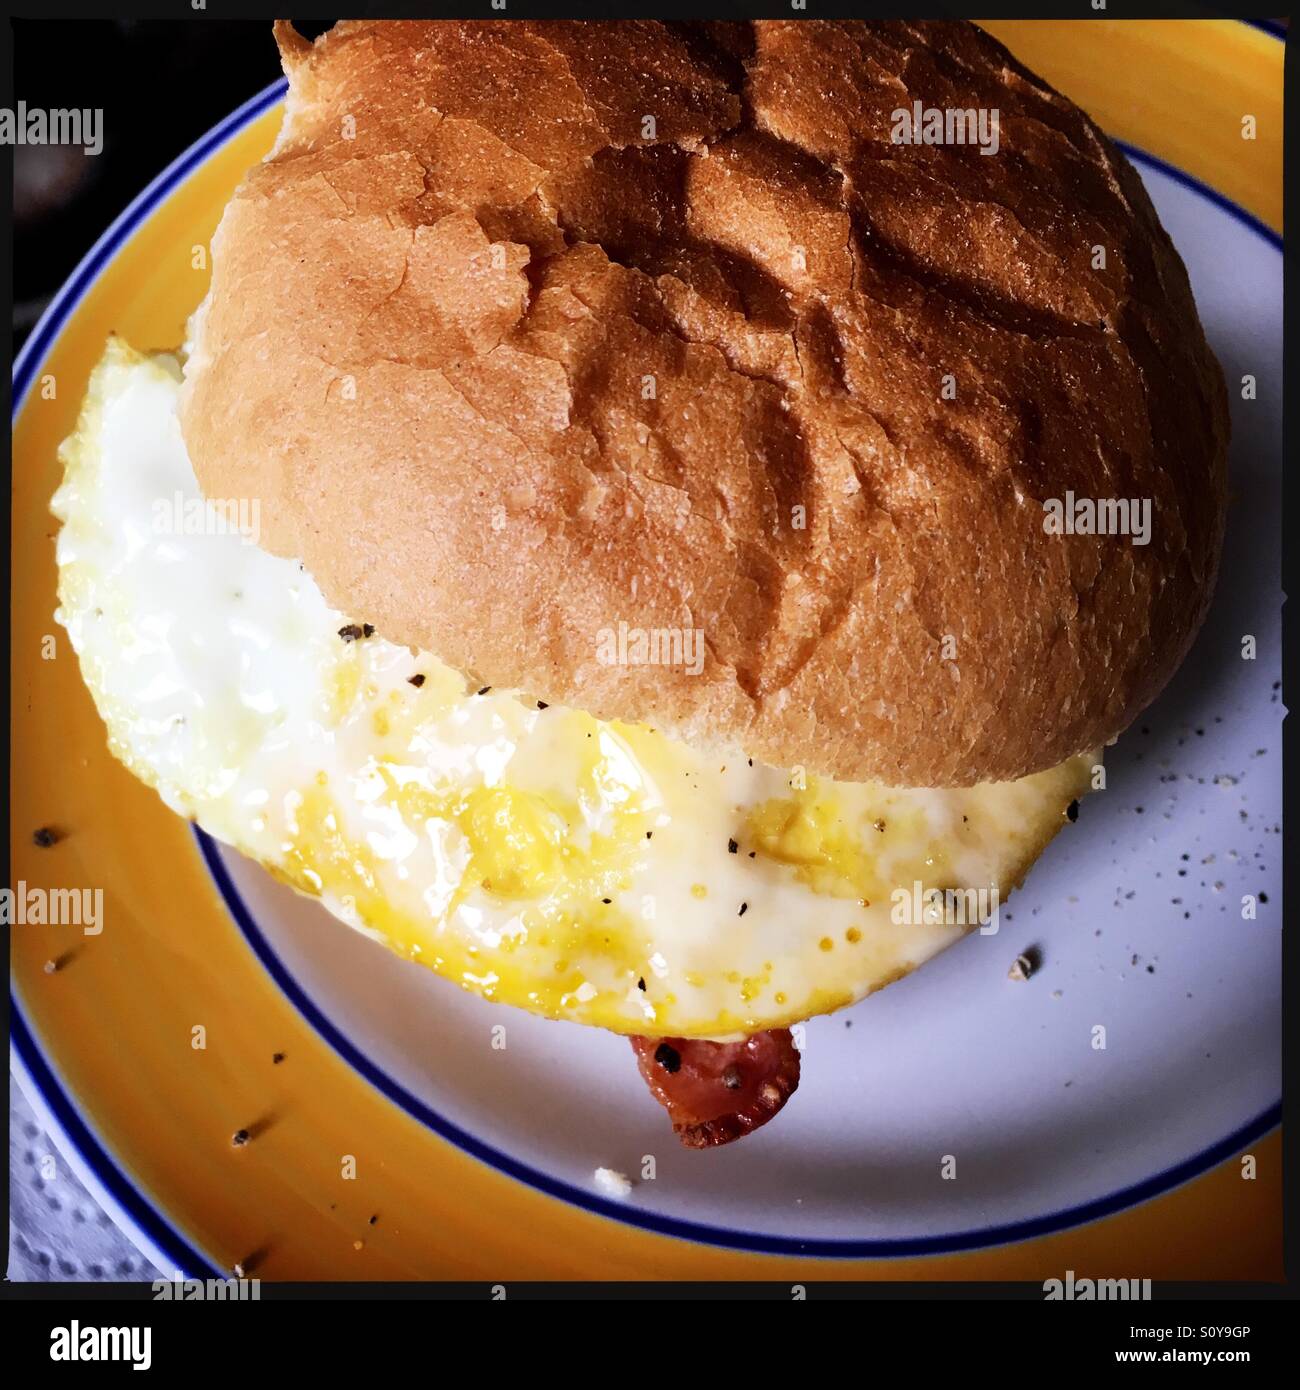 Egg and bacon roll on a plate Stock Photo